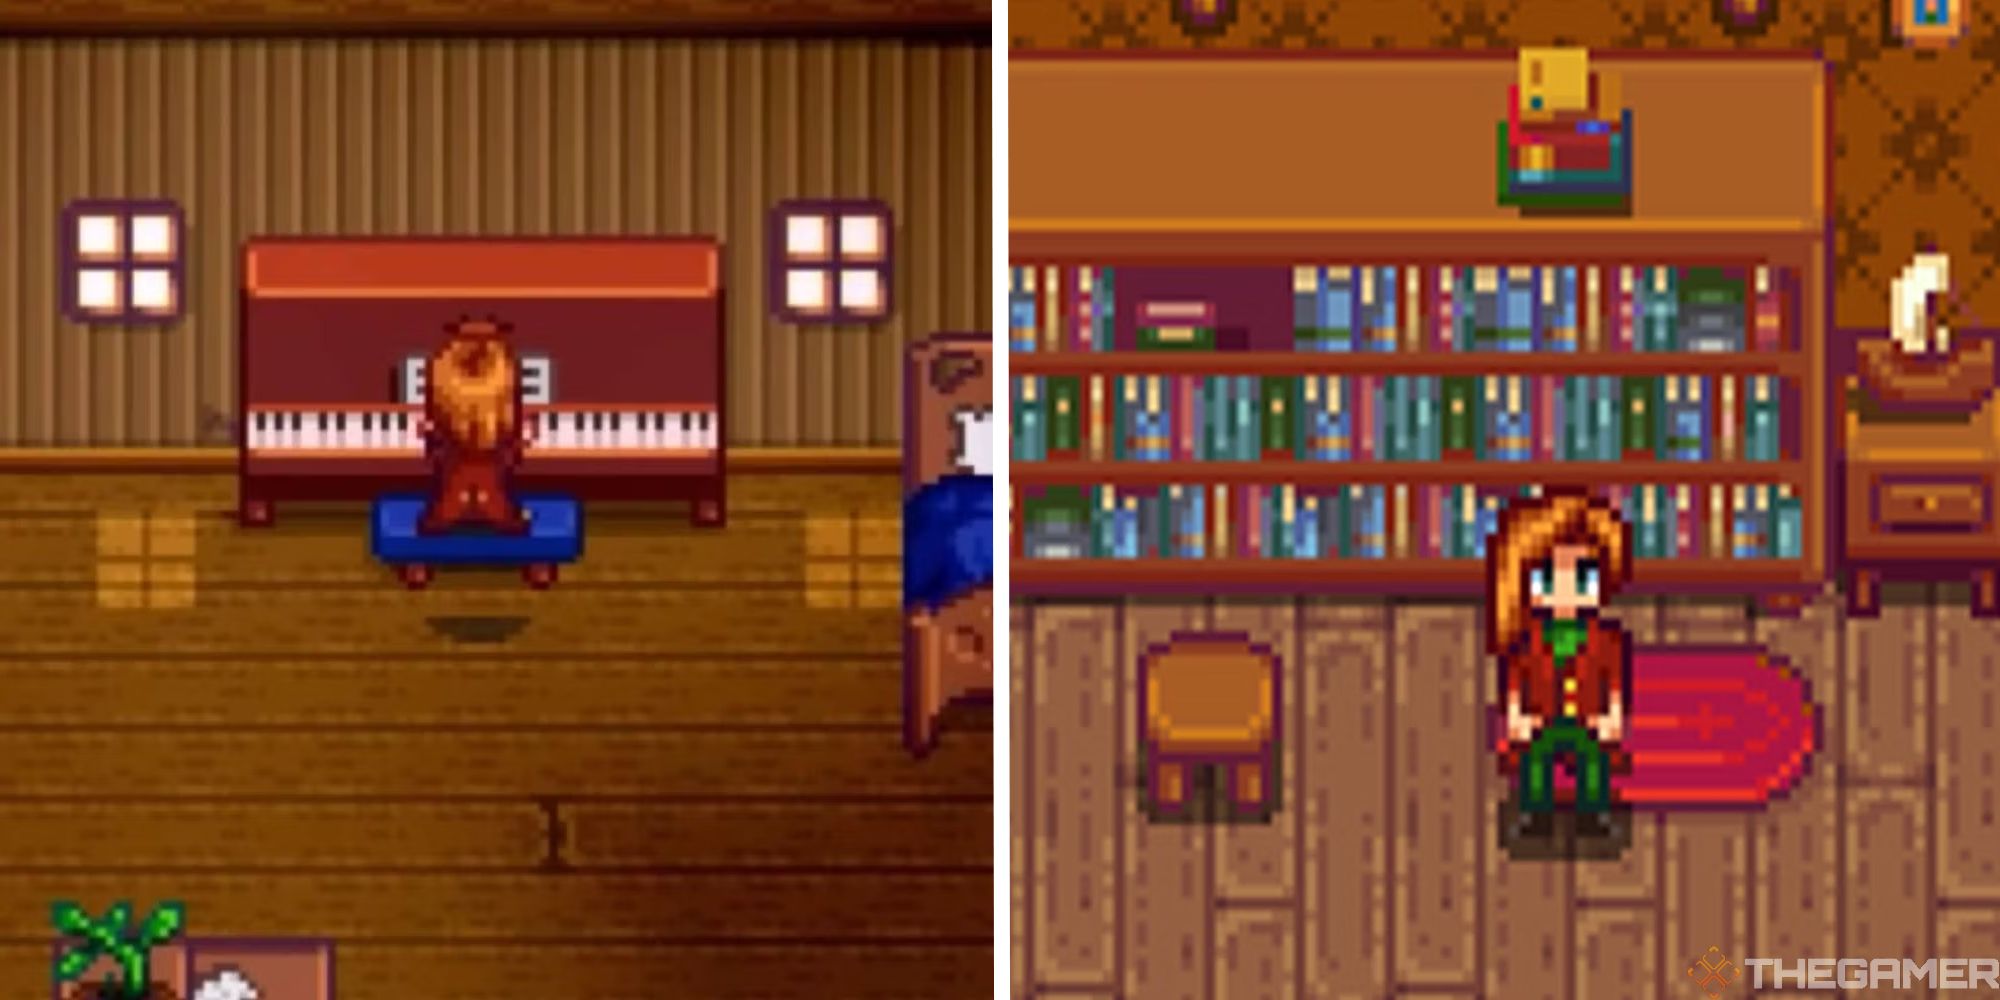 split image showing elliot playing piano next to image of elliot in spouse room